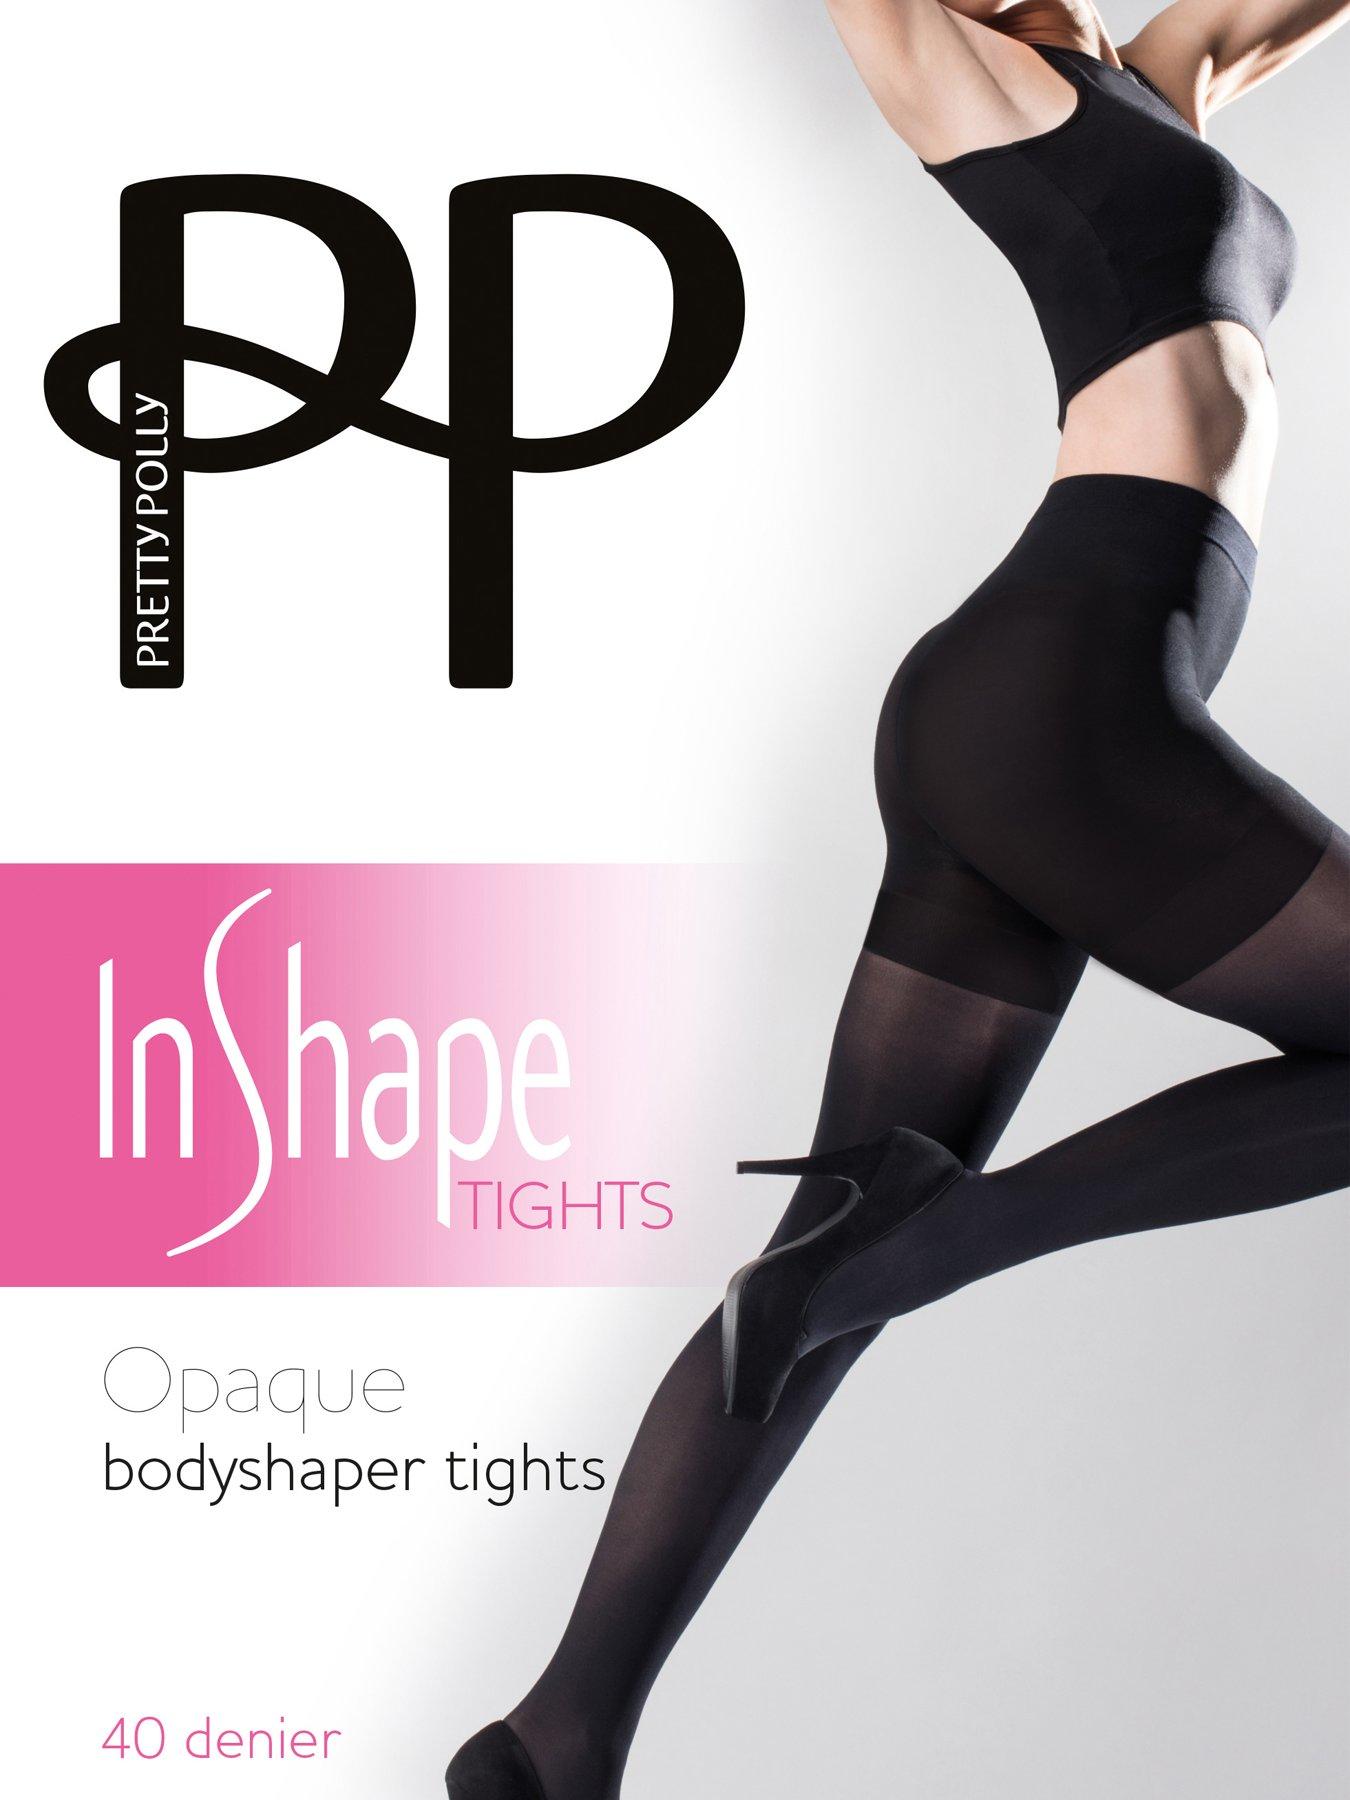 Spanx All The Way - Leg Support Pantyhose 101